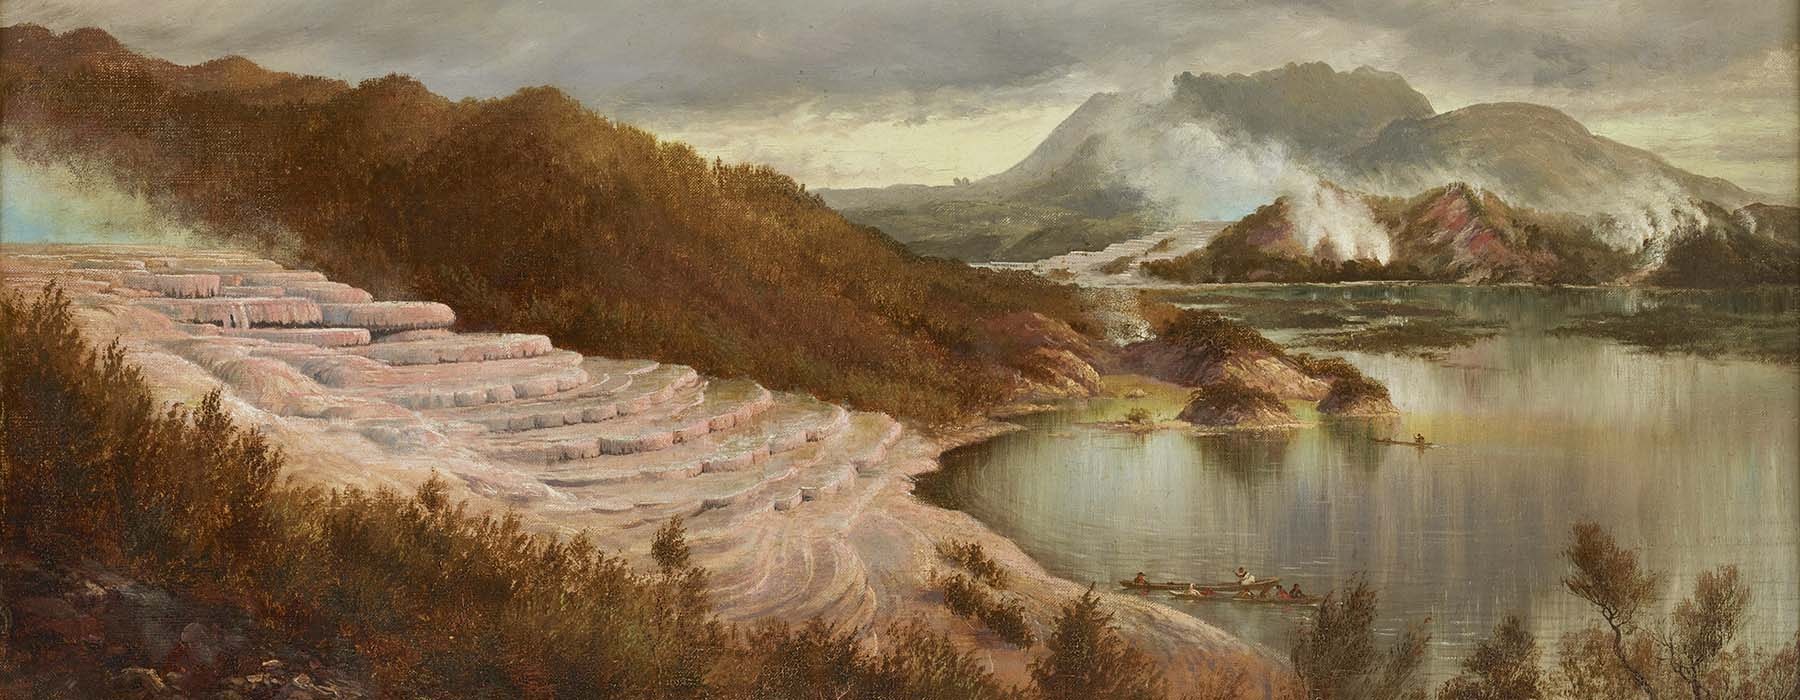 The pink and white terraces